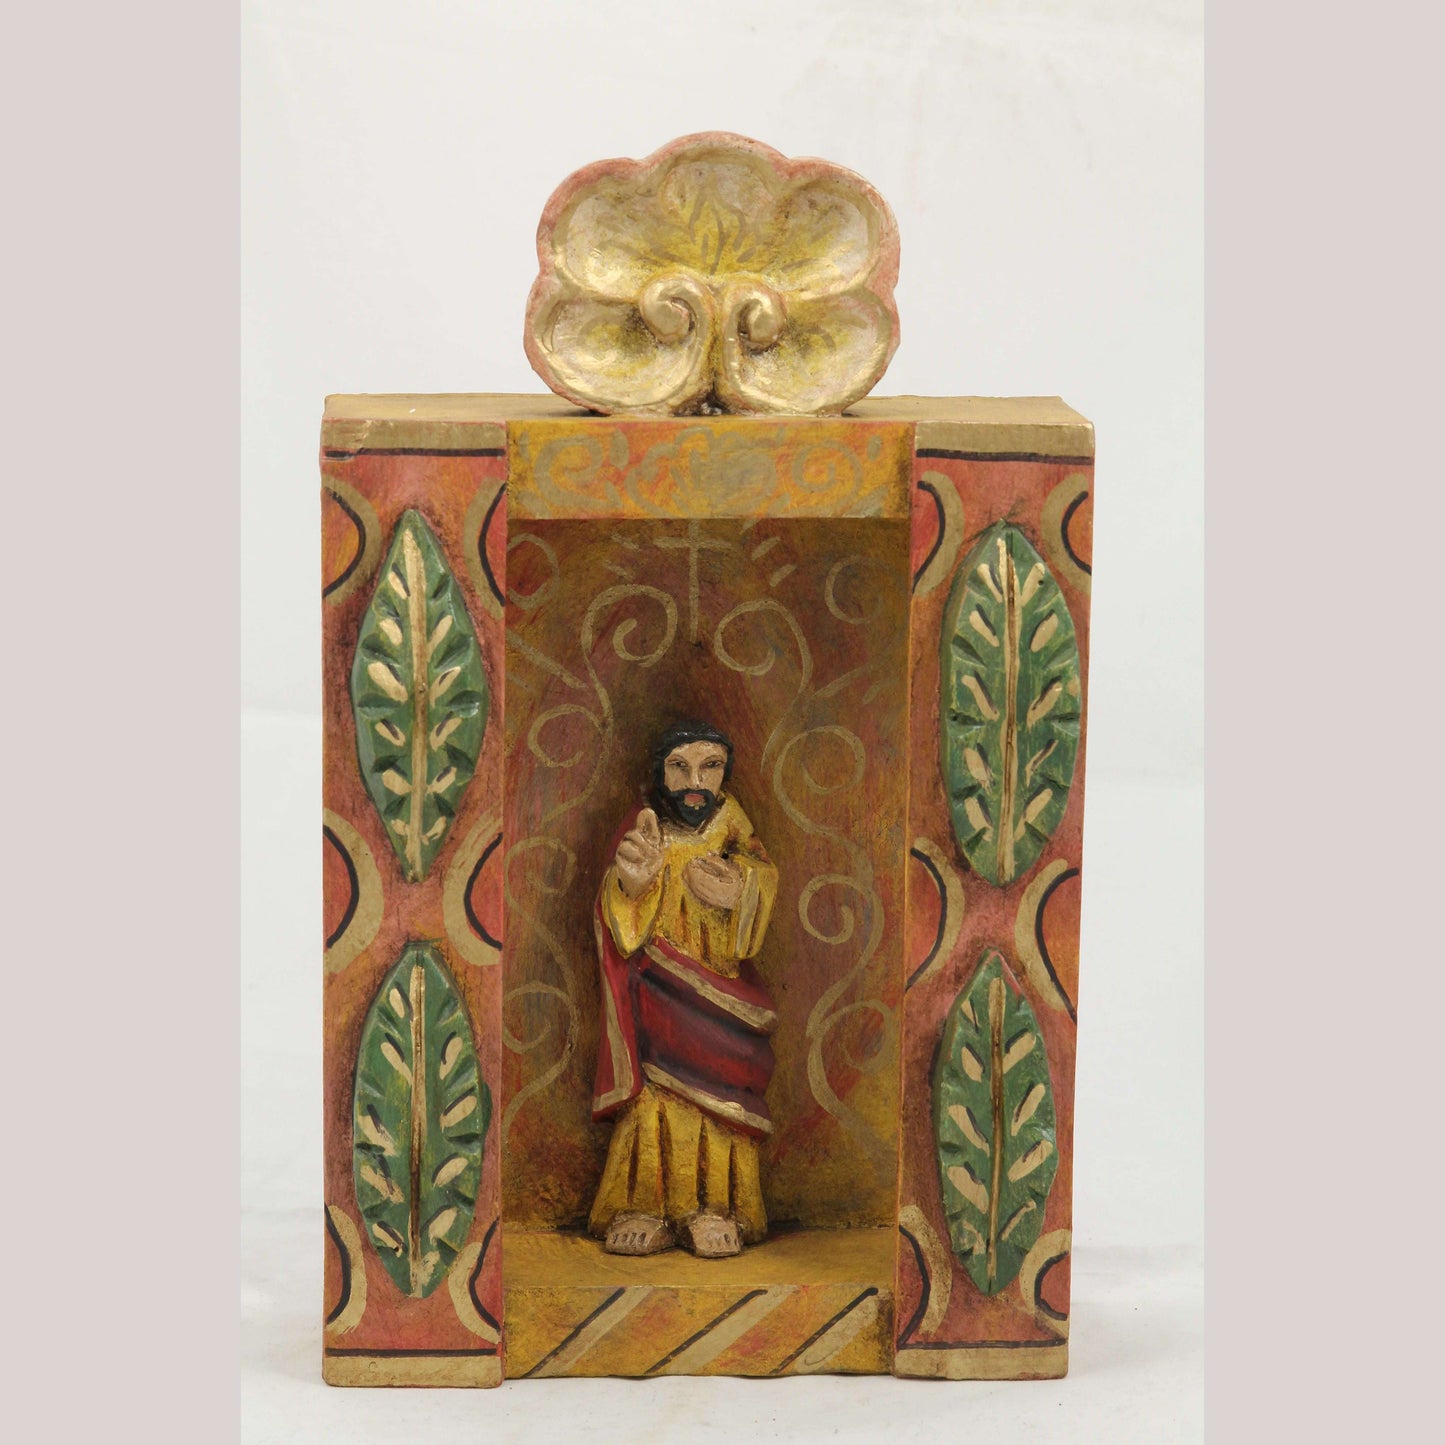 Wood Niche/Reliquary Mexican Folk Art Religious Rustic Handmade/Painted Jesus #2